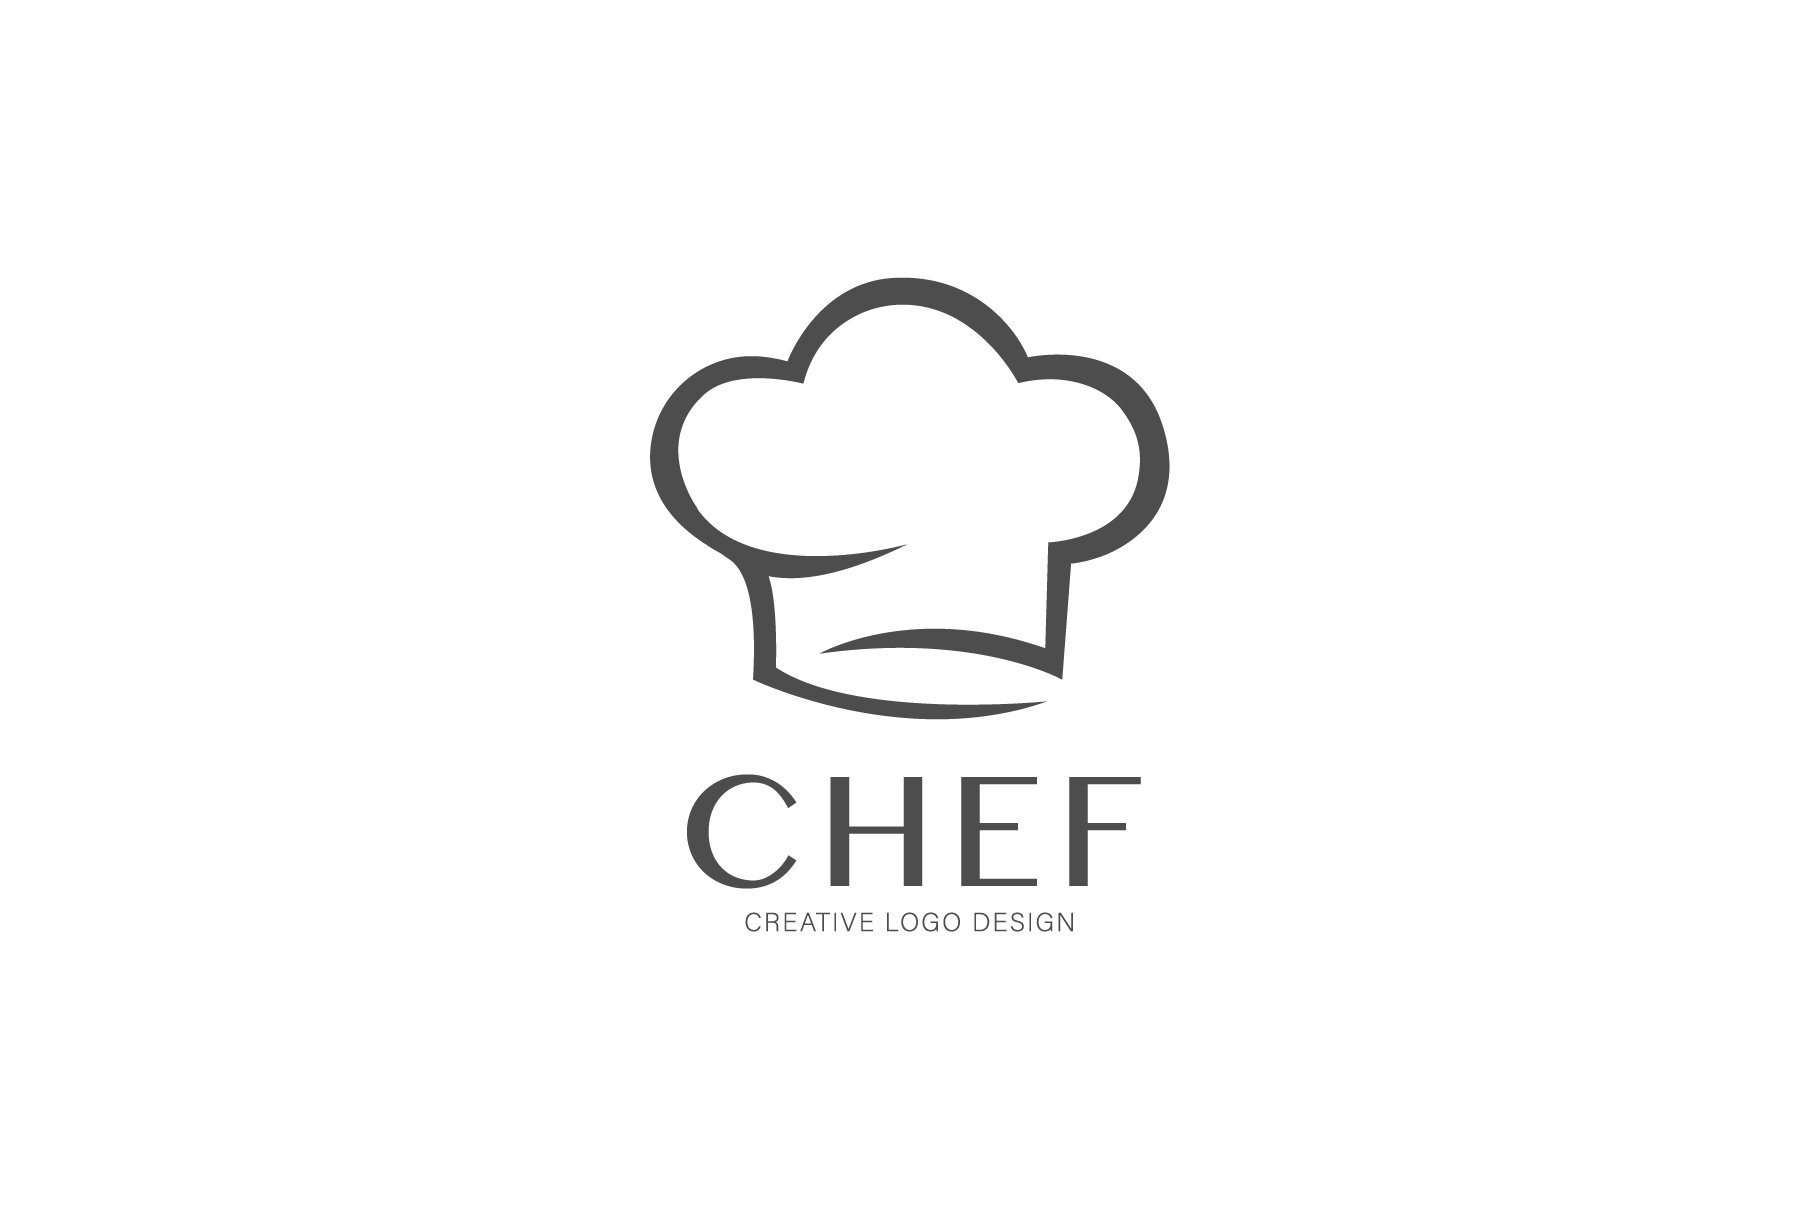 Grey logo for food business.